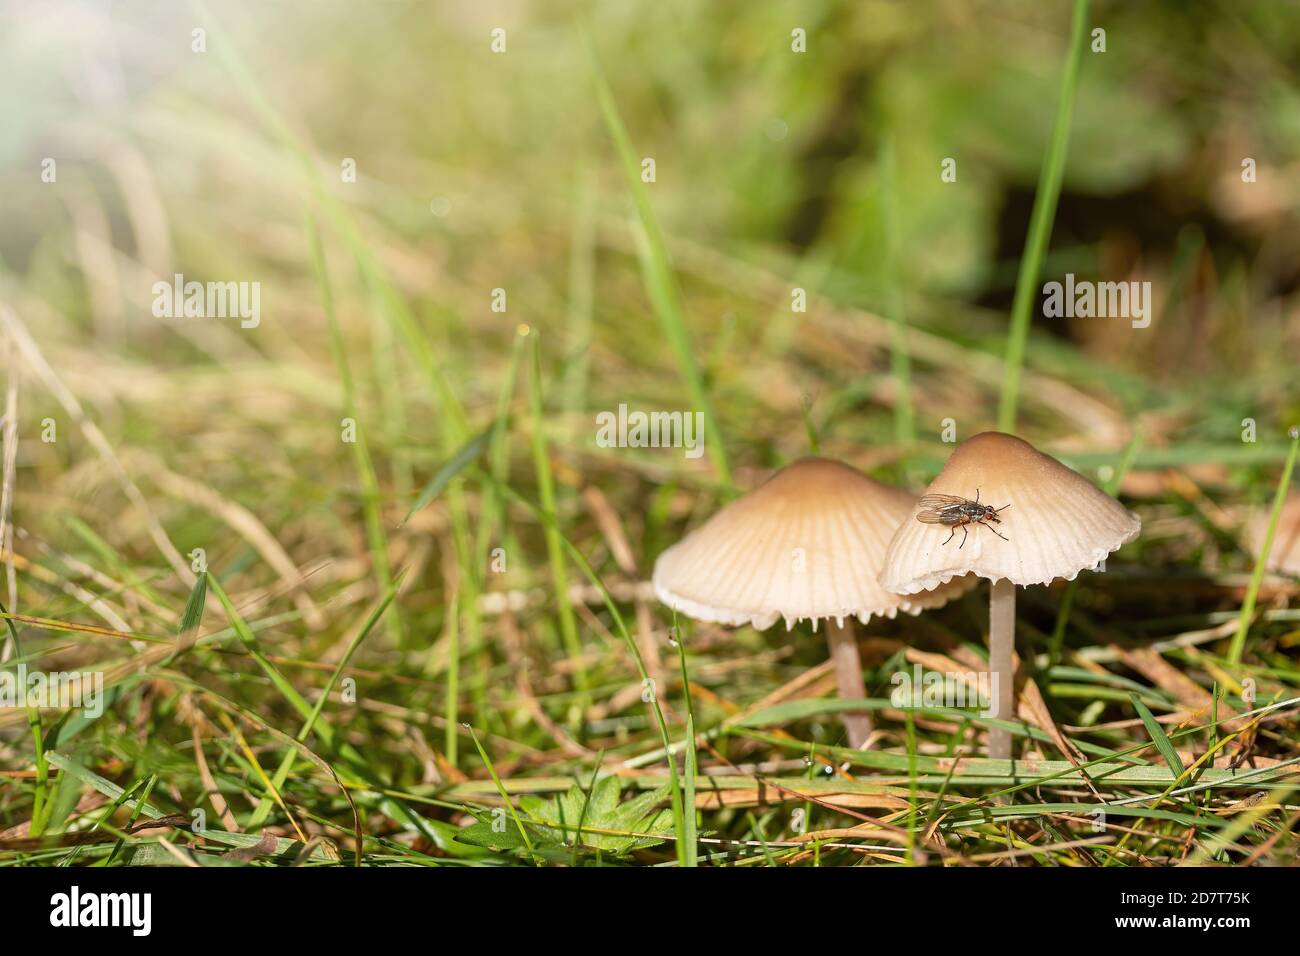 Pair of earthy inocybe wild poisonous mushrooms with insect on the cap. Stock Photo